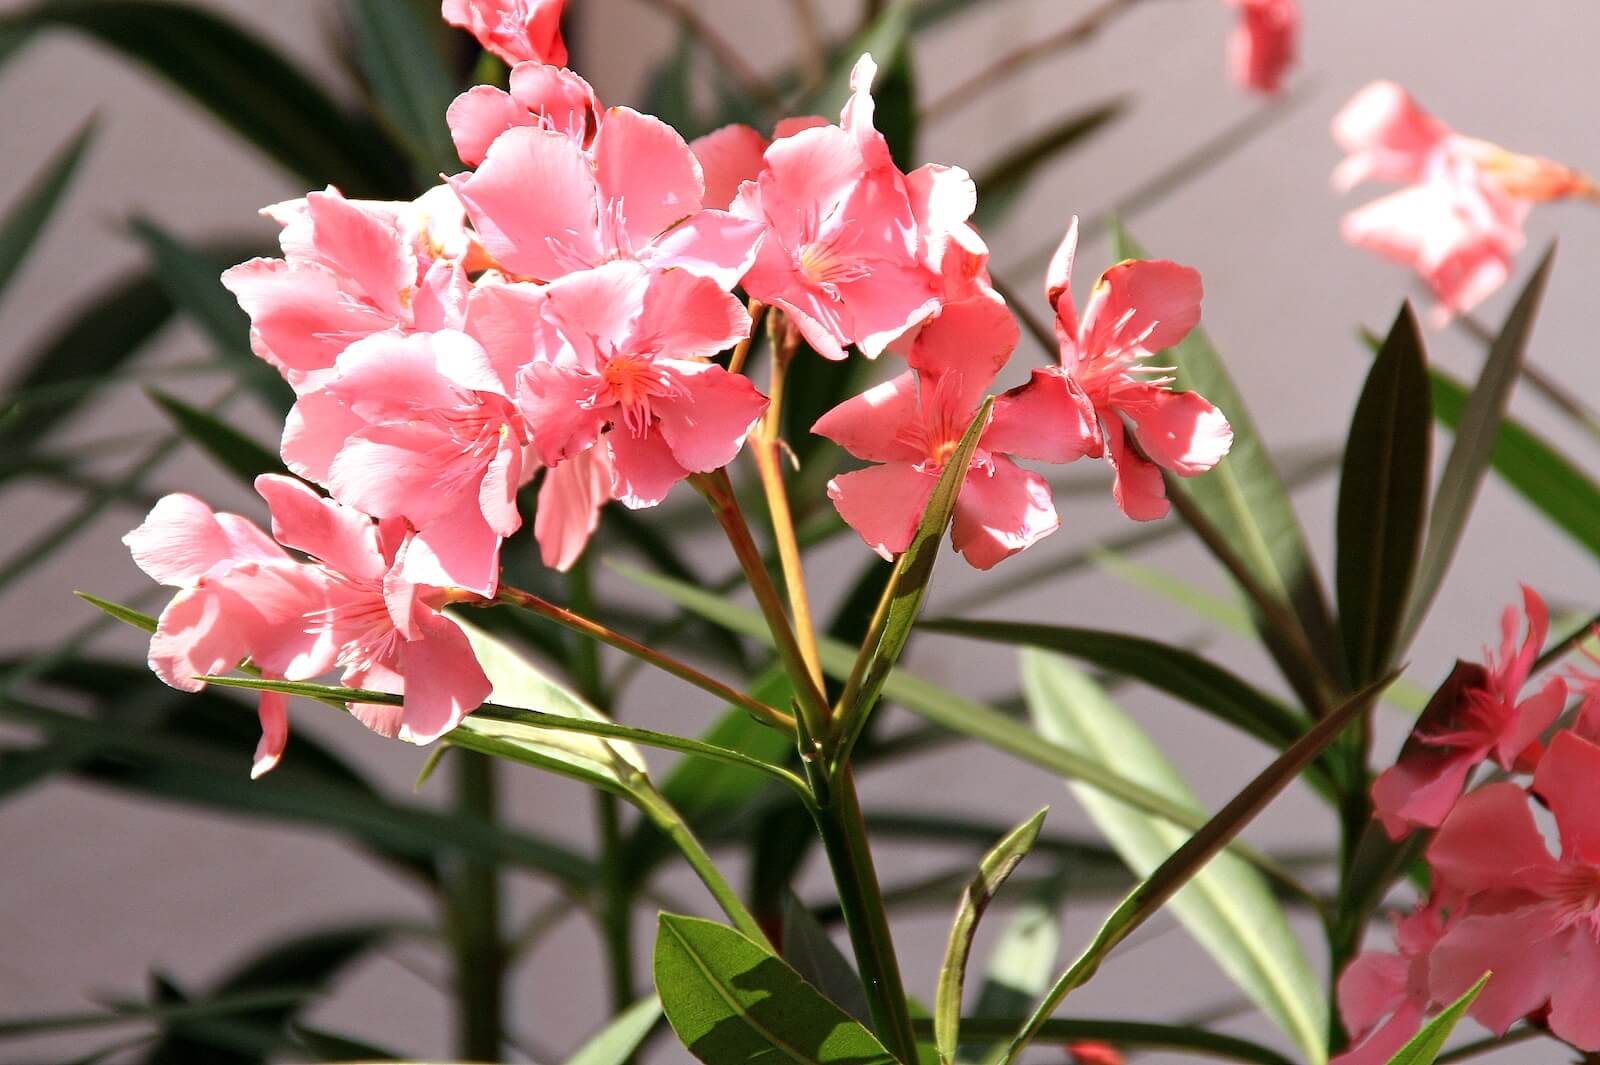 Oleandrin is a compound found in the oleander plant